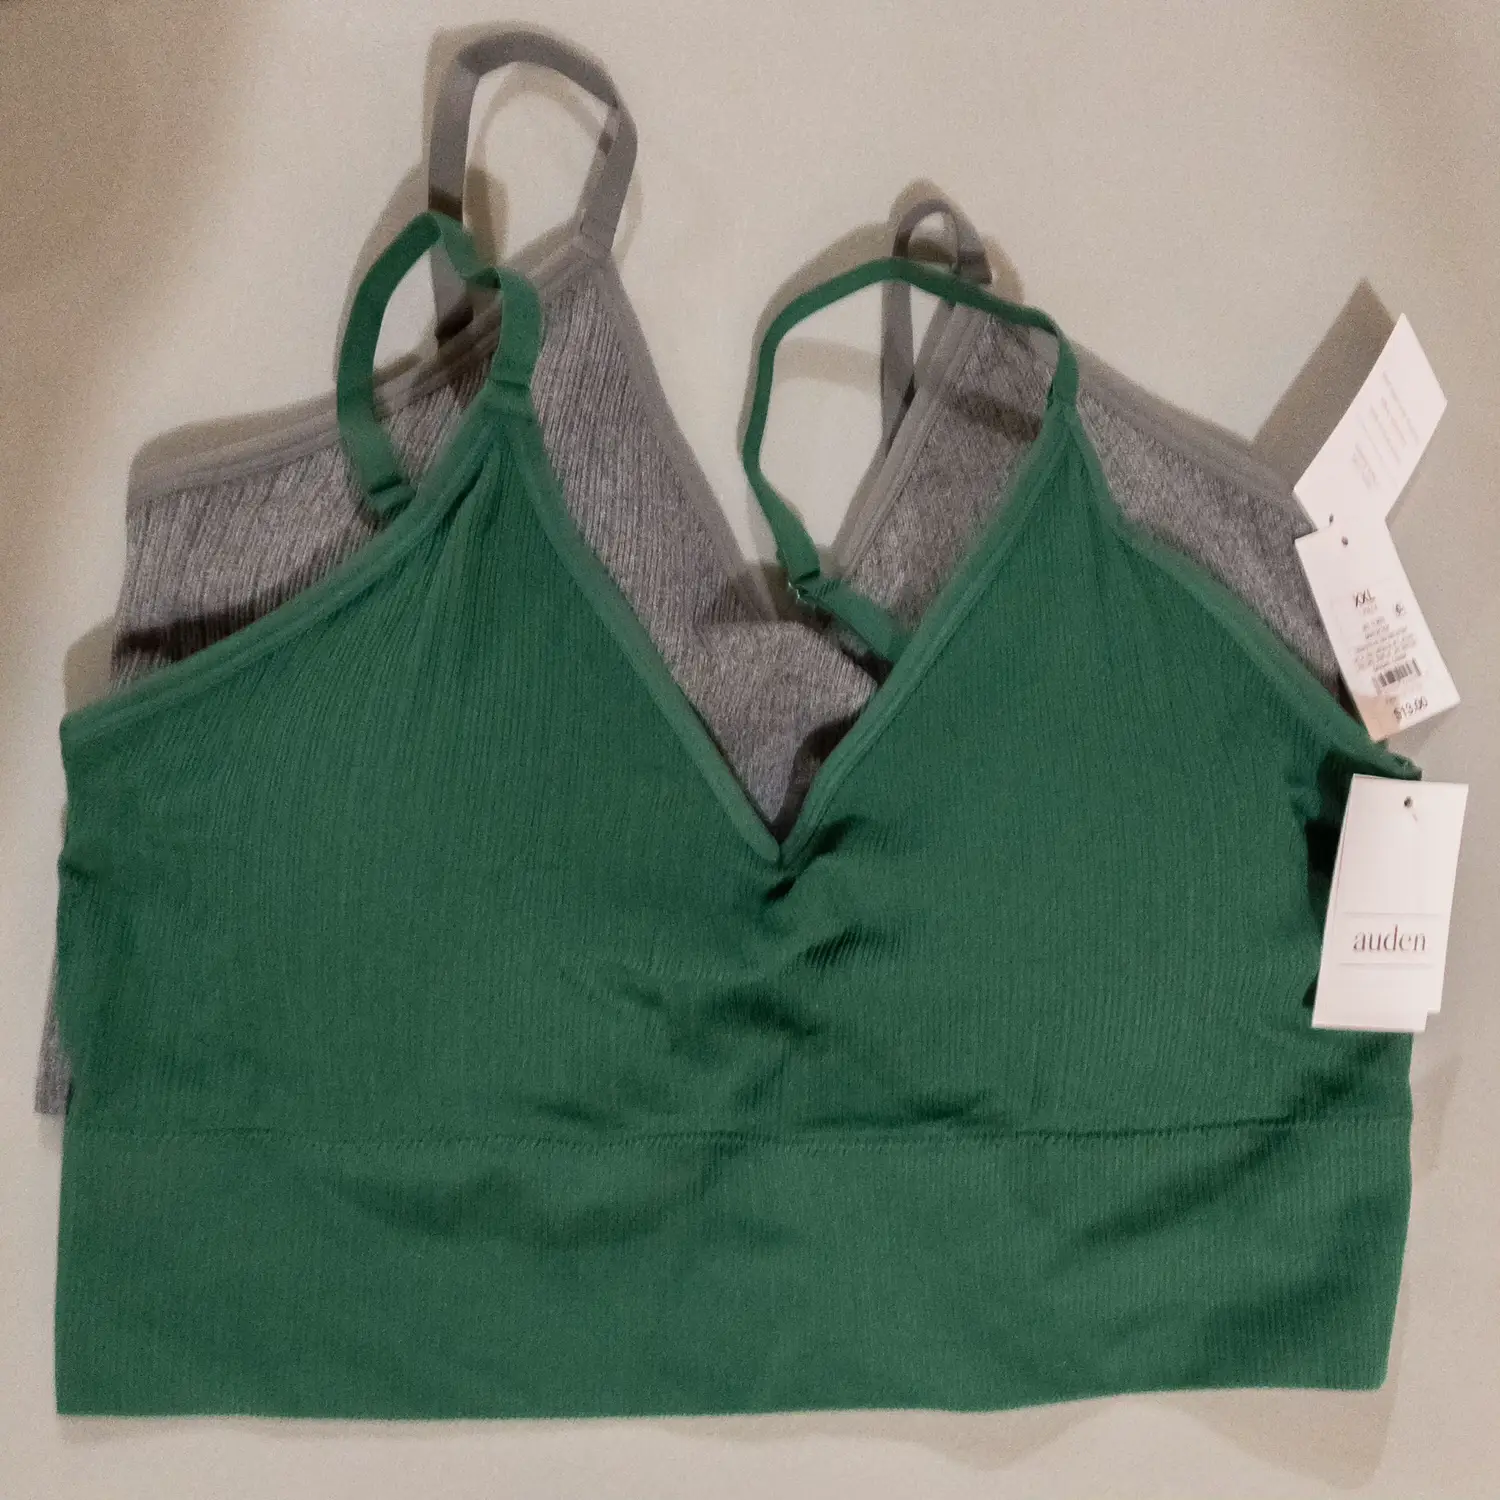 Comfy Target bralettes, Gallery posted by ChidaChick